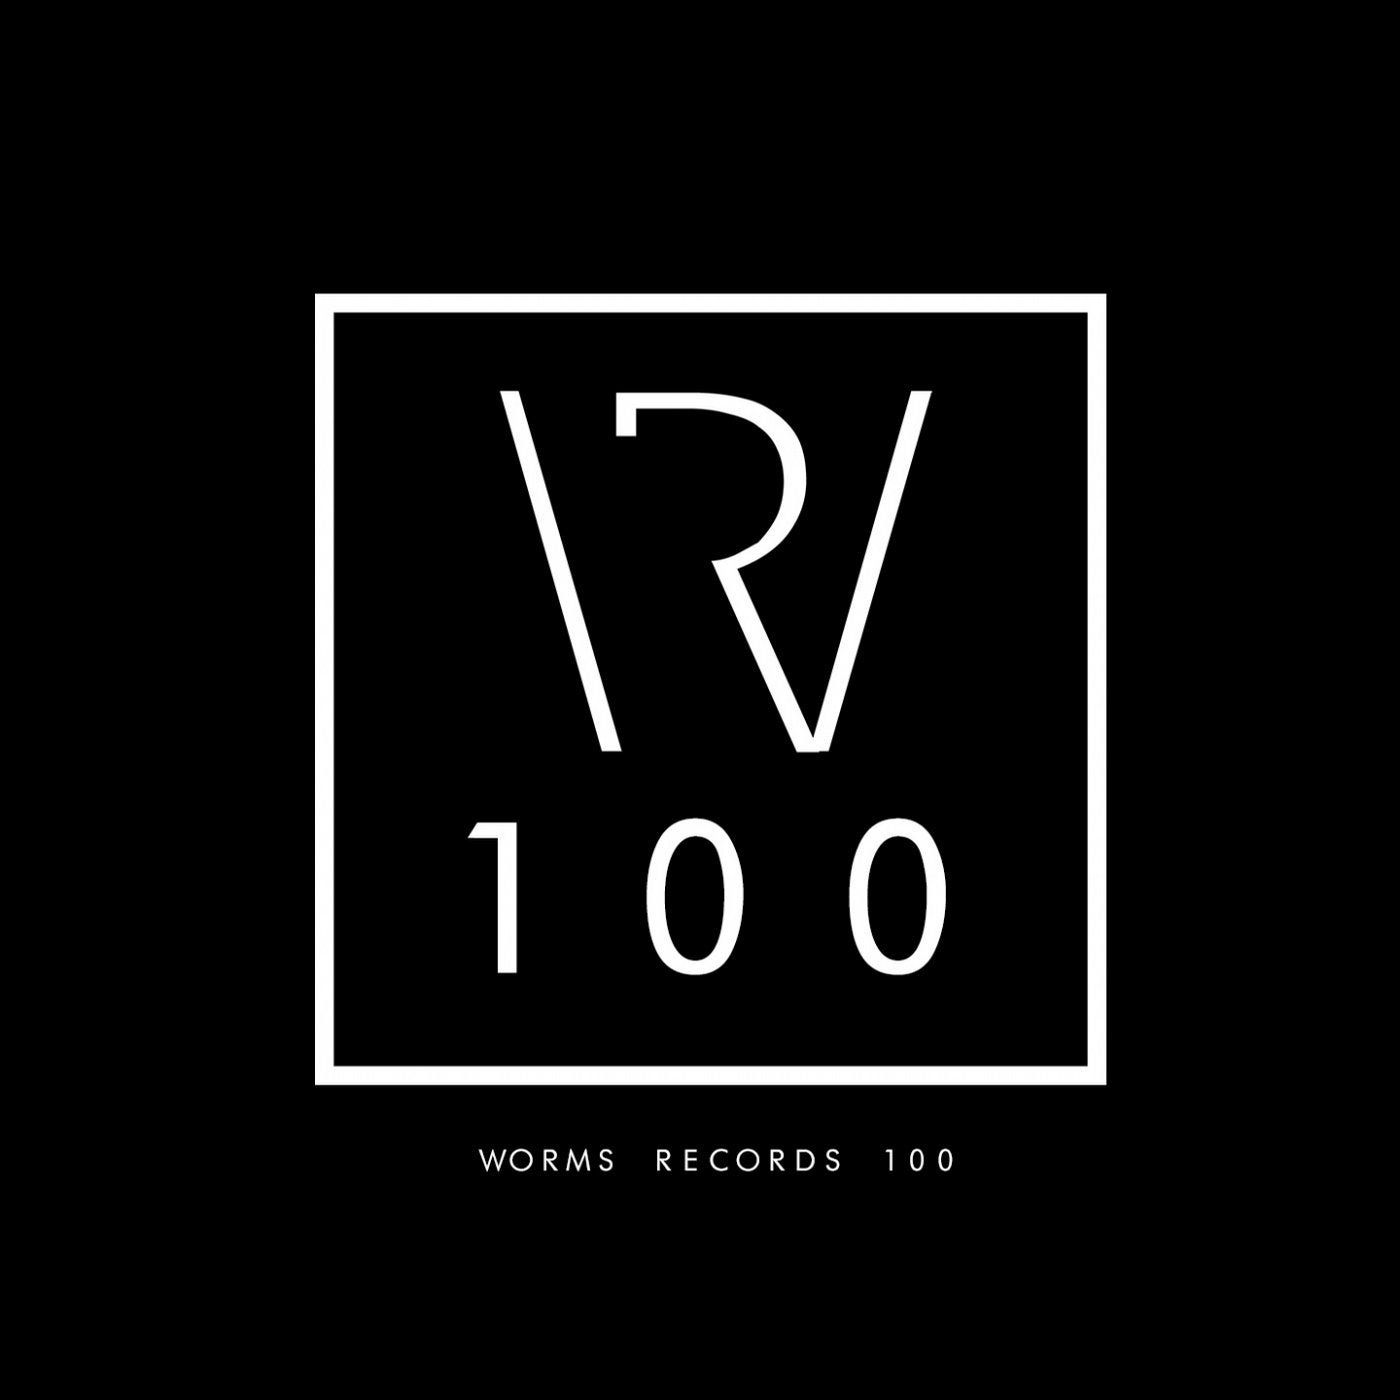 Worms Records 100